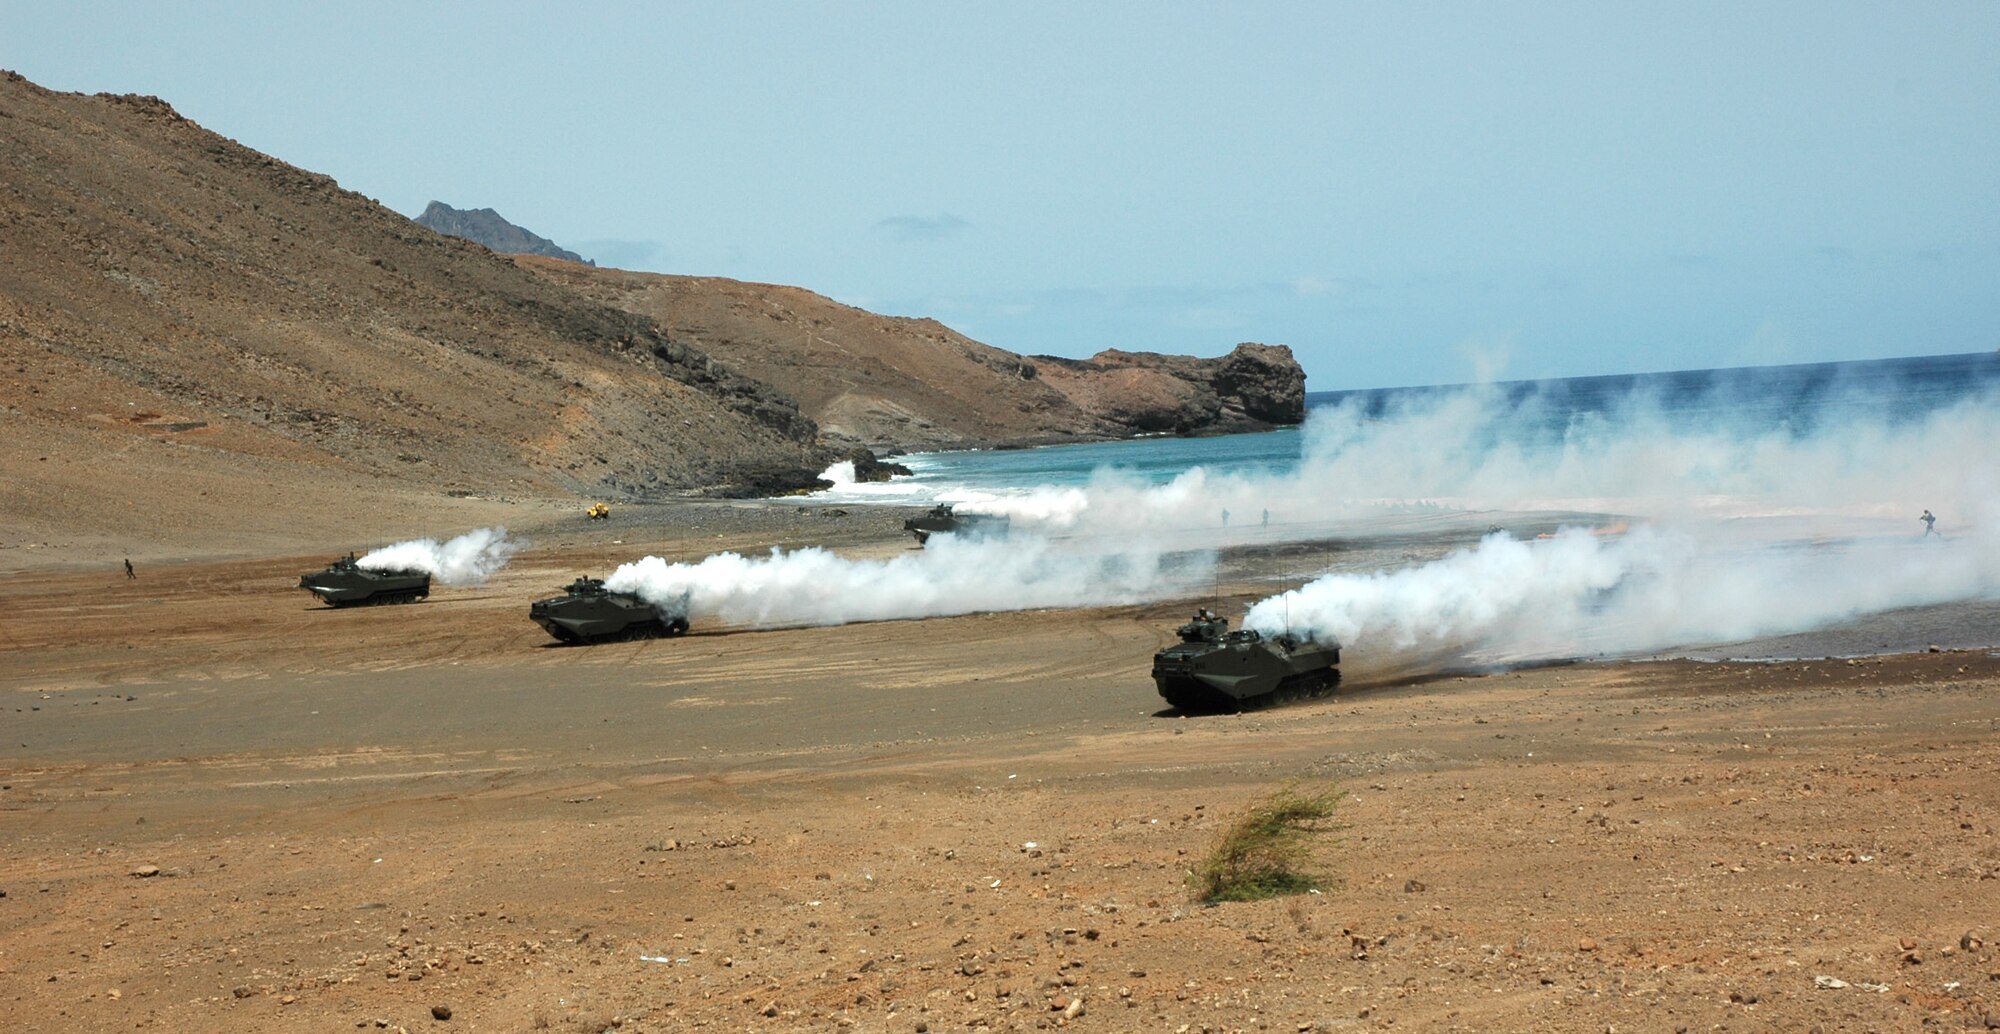 A simulated amphibious and land assault is conducted in Sao Vicente, Cape Verde, on Friday, June 23, to demonstrate NATO's show of force during Exercise Steadfast Jaguar. More than 7,000 NATO servicemembers from land, maritime and air components are participating in the exercise, which ends today. (U.S. Air Force photo/Capt. Krista Carlos) 